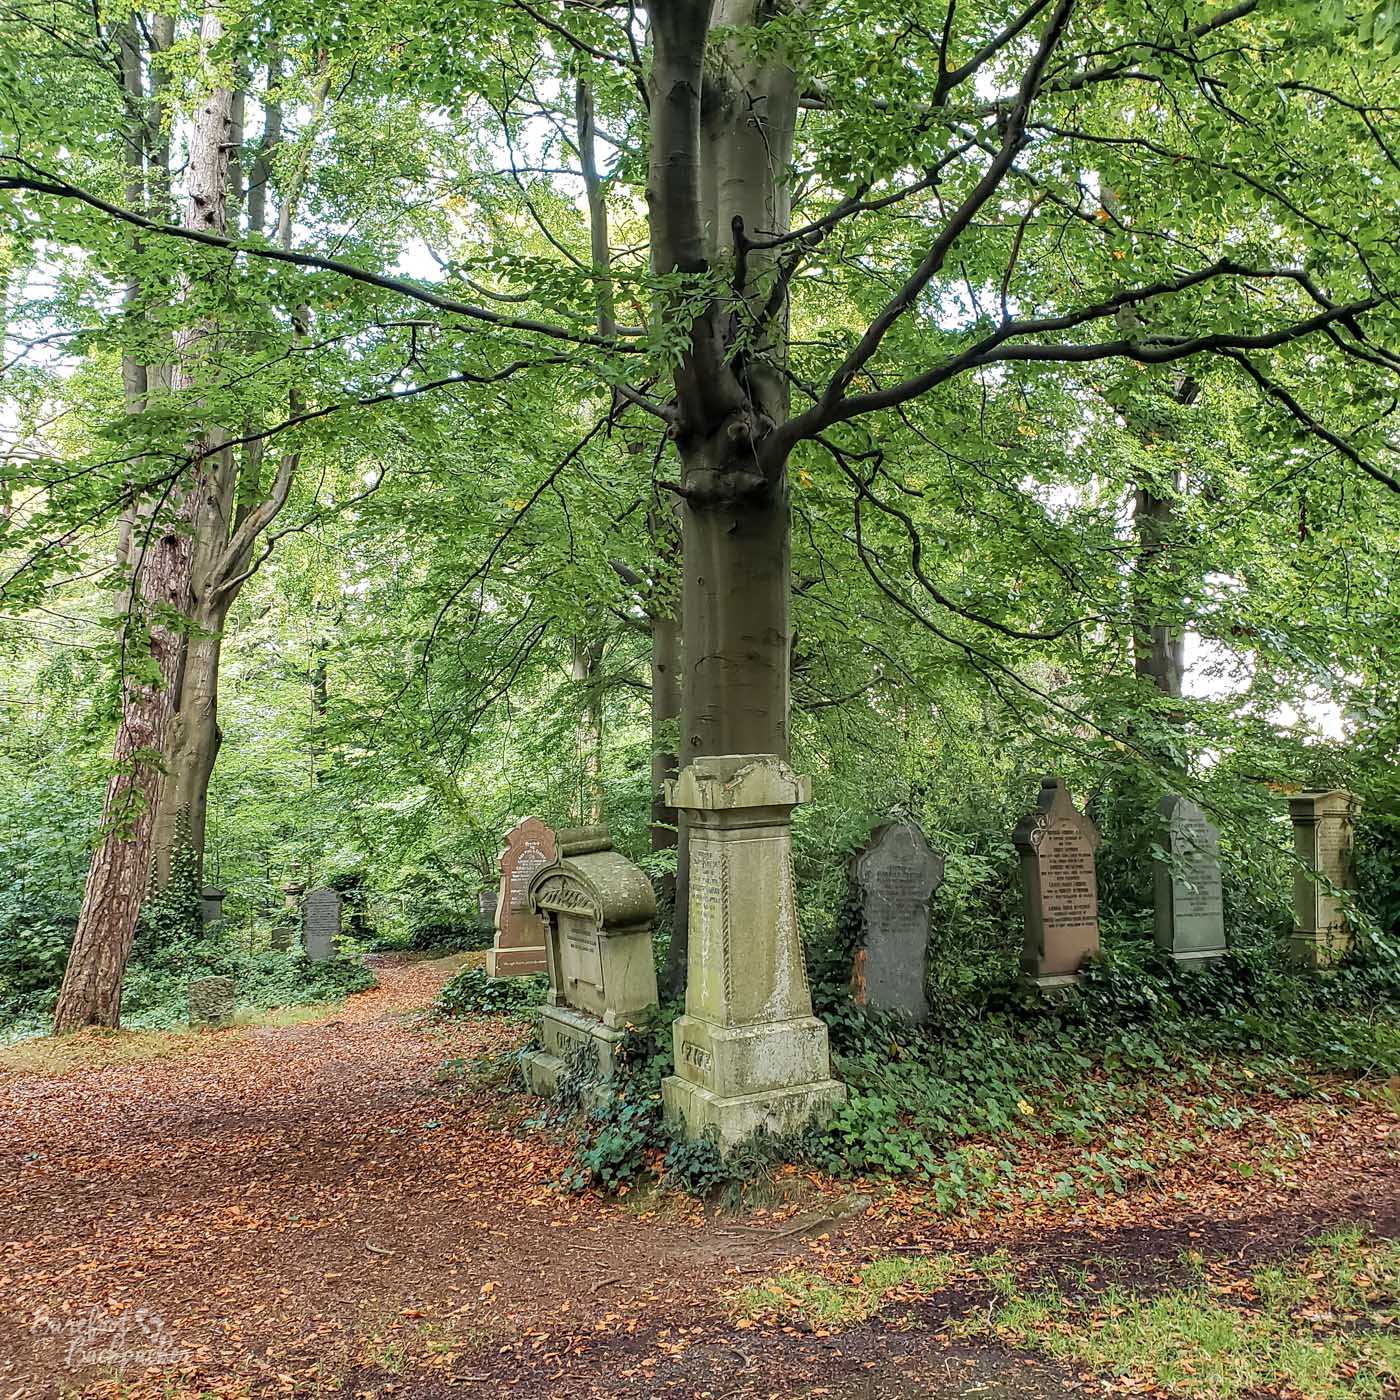 A number of gravestones stand in front of, and in some cases leaning on, a couple of large trees. The floor is leaves and soil.